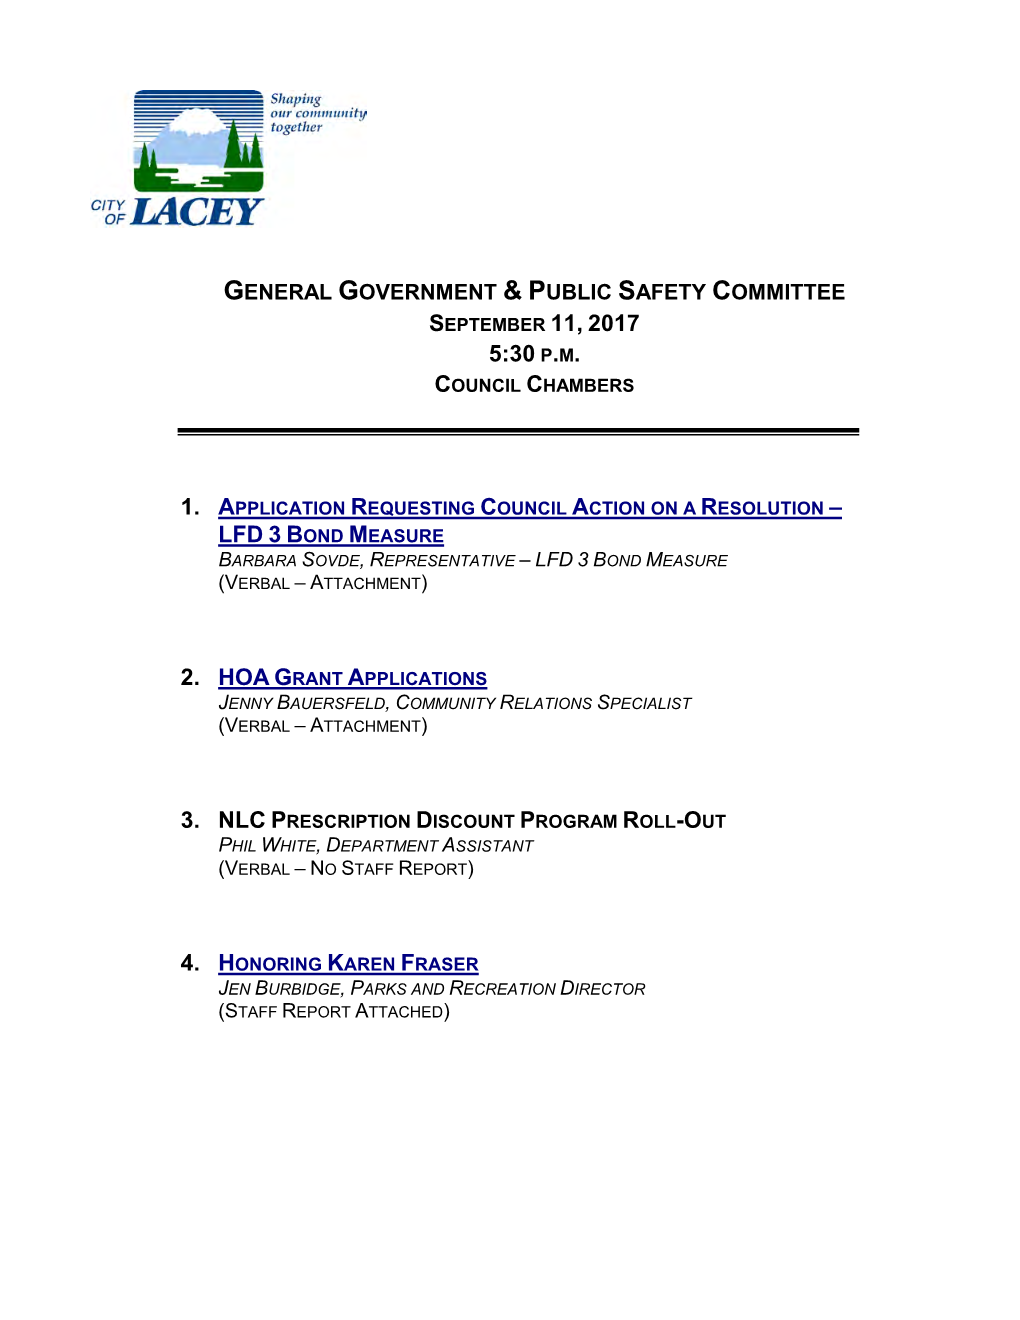 General Government & Public Safety Committee Agenda 9.11.17